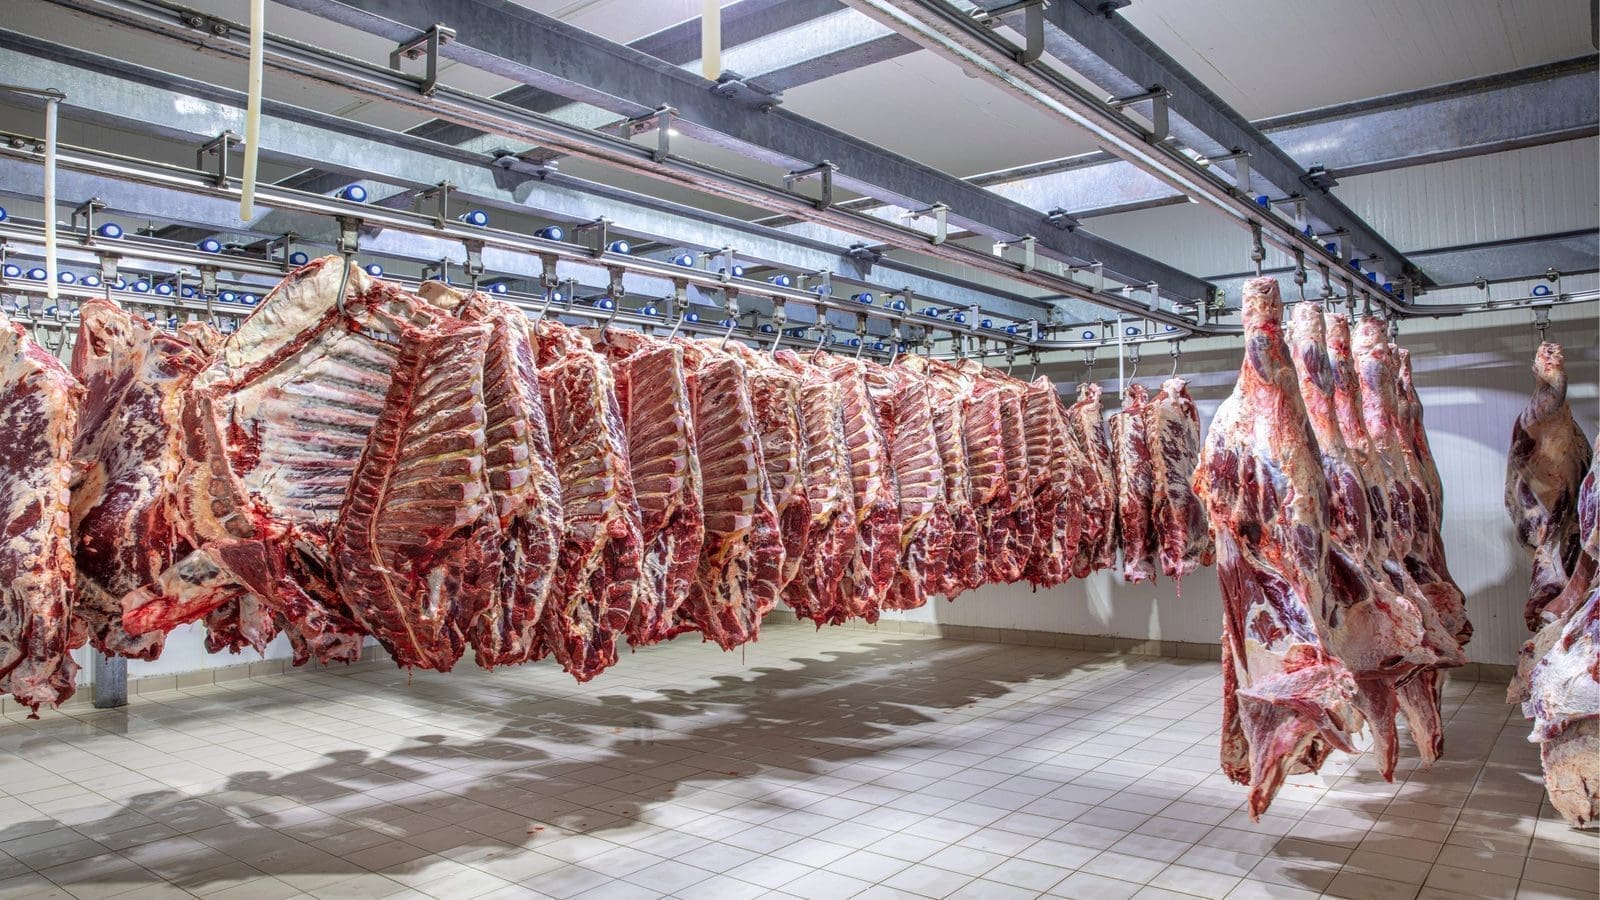 Namibian meat producers raise US$9.8m to fund establishment of beef processing facility